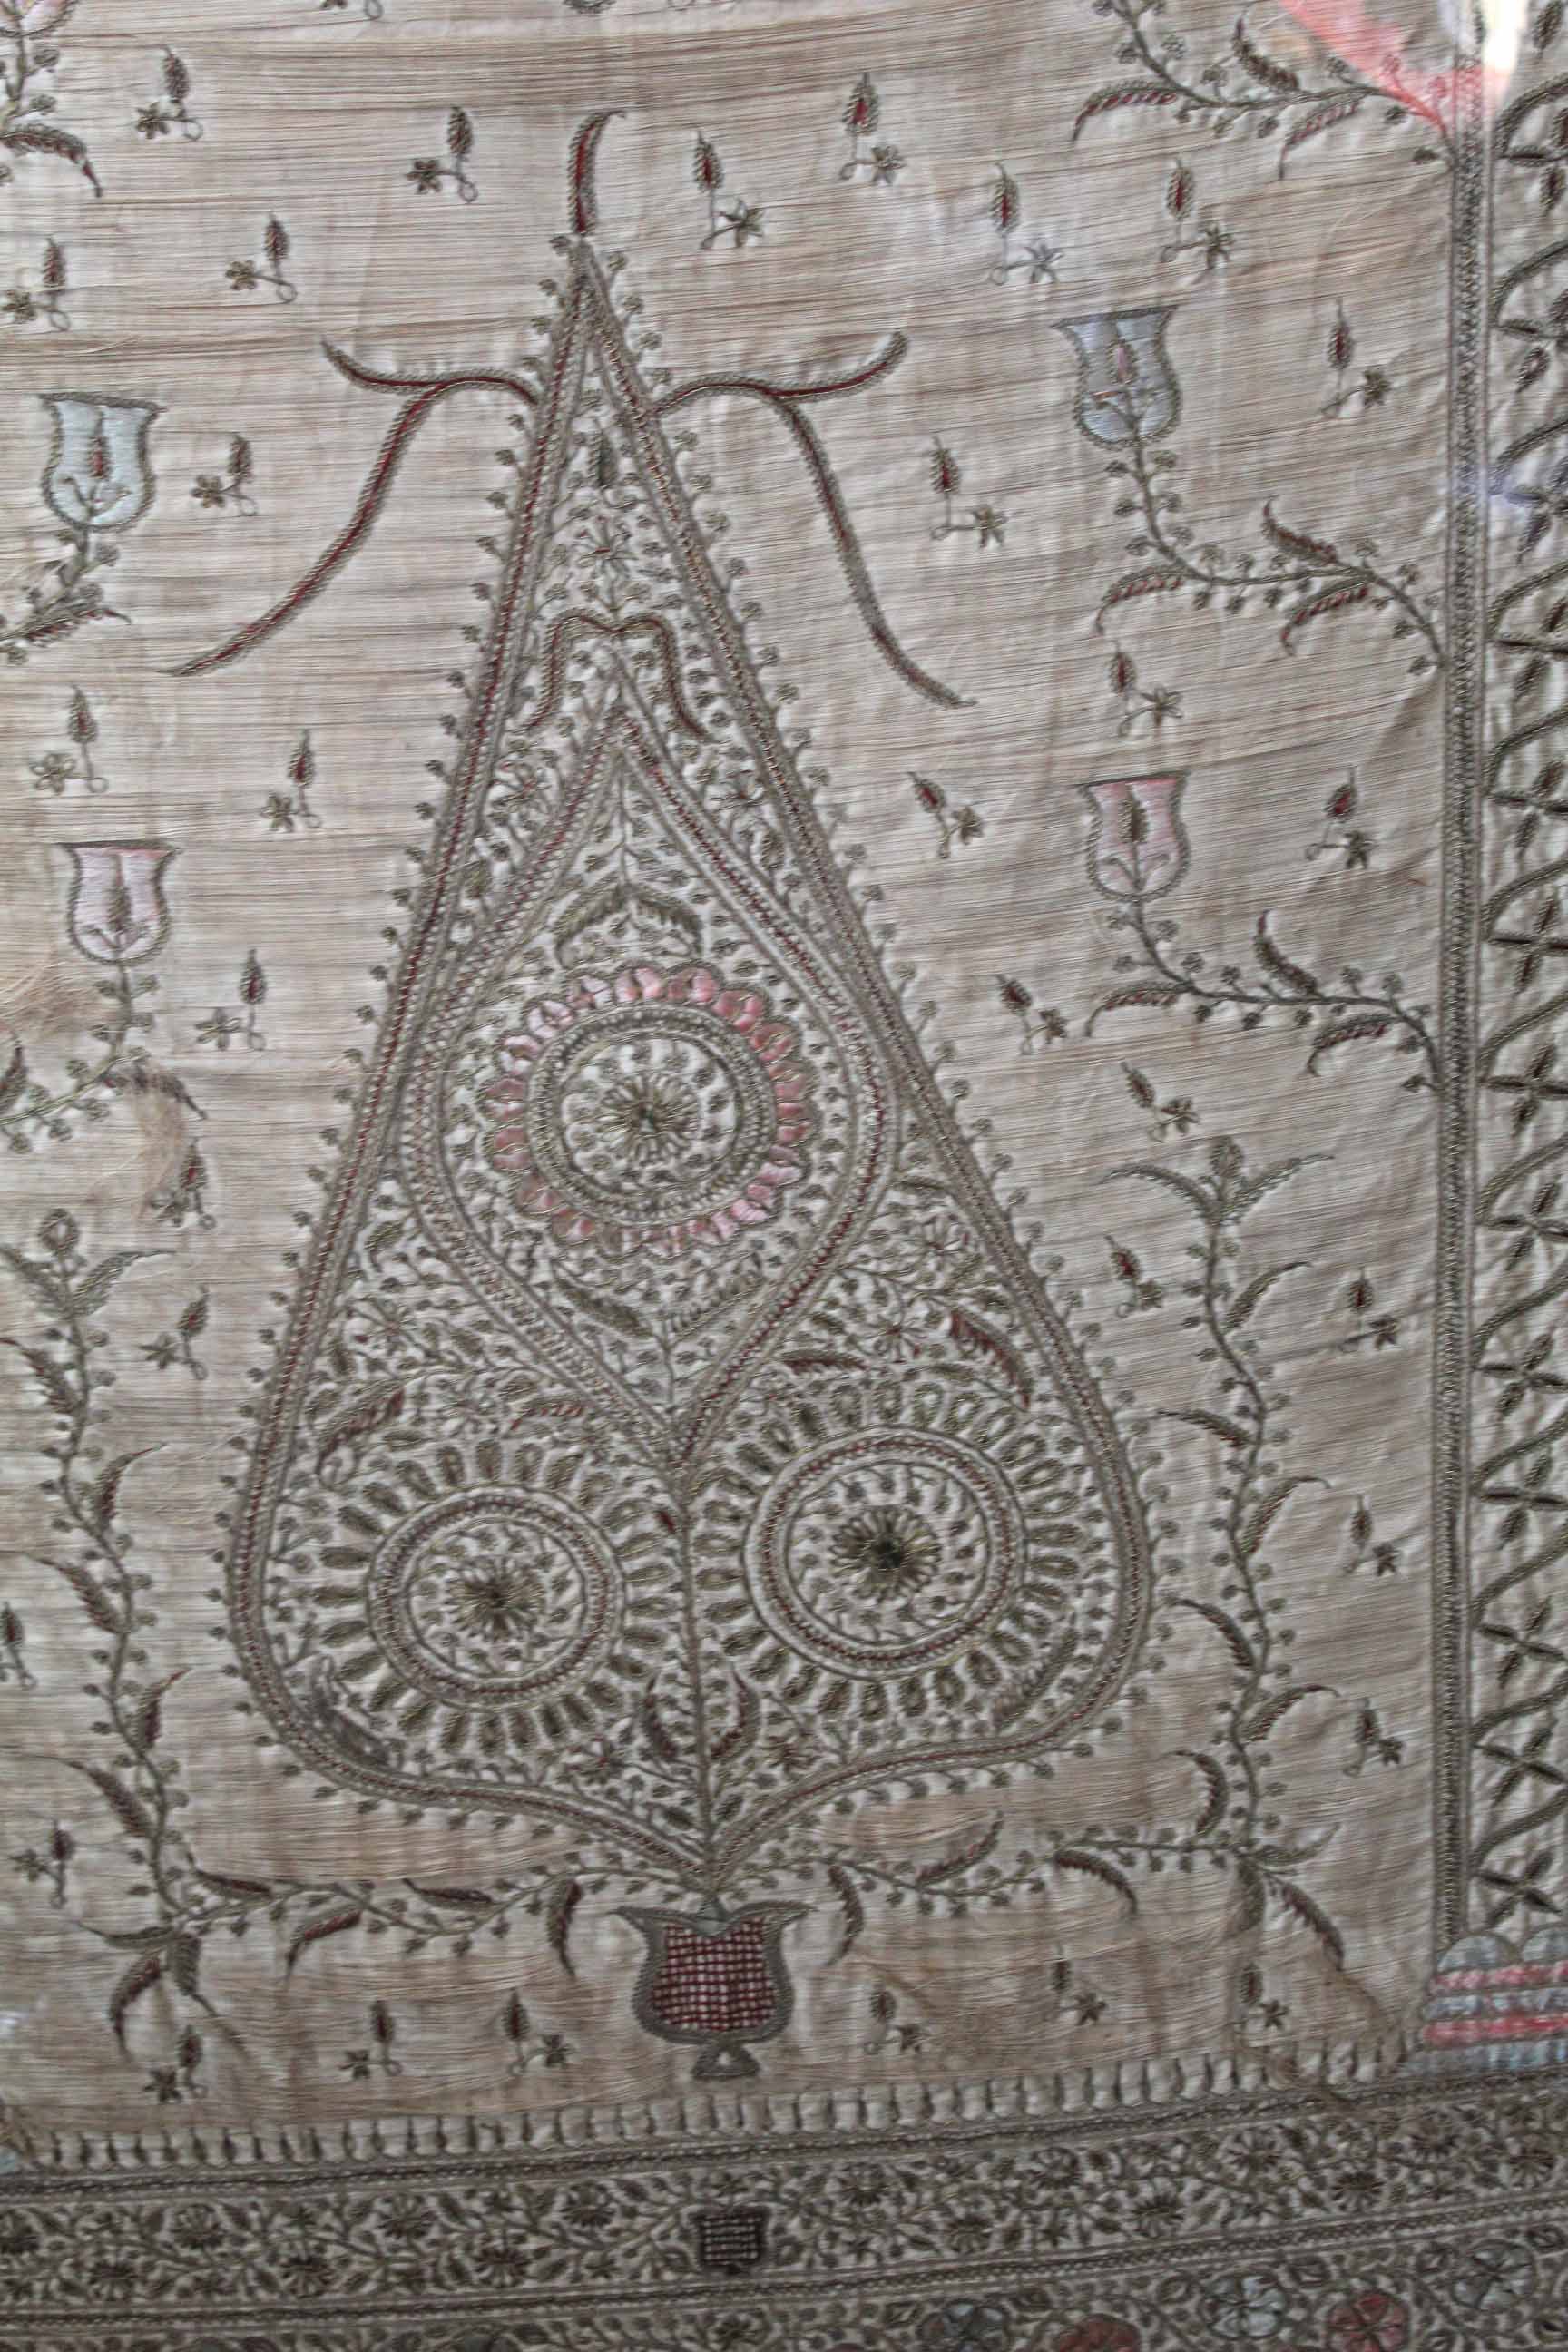 Large silk and gilt filigree embroidered wall hanging or table cloth of Persian or Oriental - Image 3 of 6